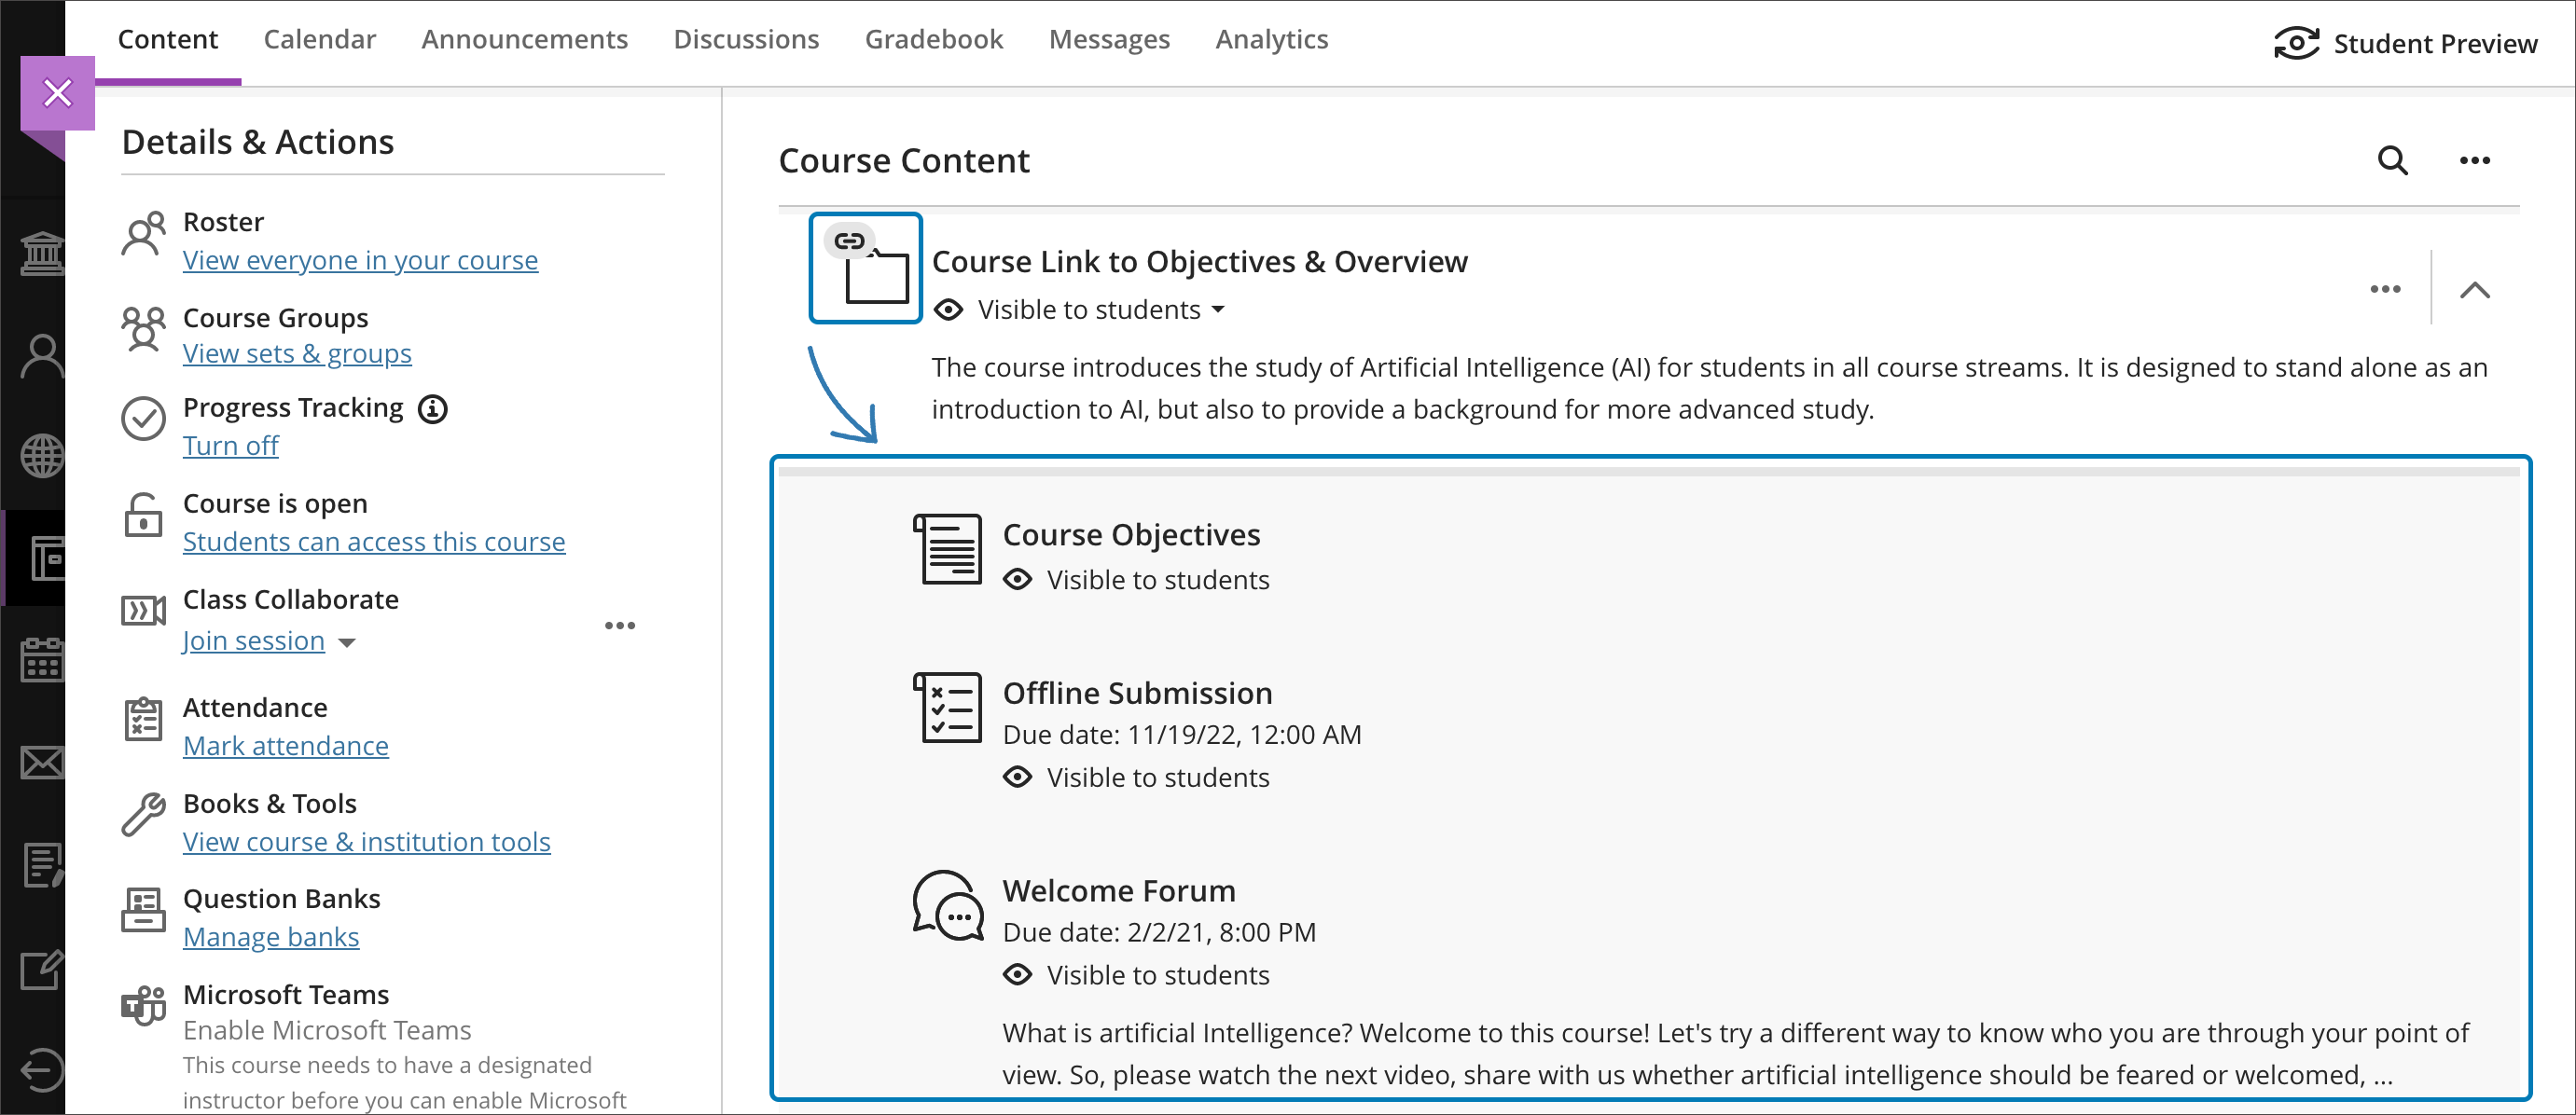 Course Link to a folder is shown as expanded, revealing the contents of the course link in a read-only view